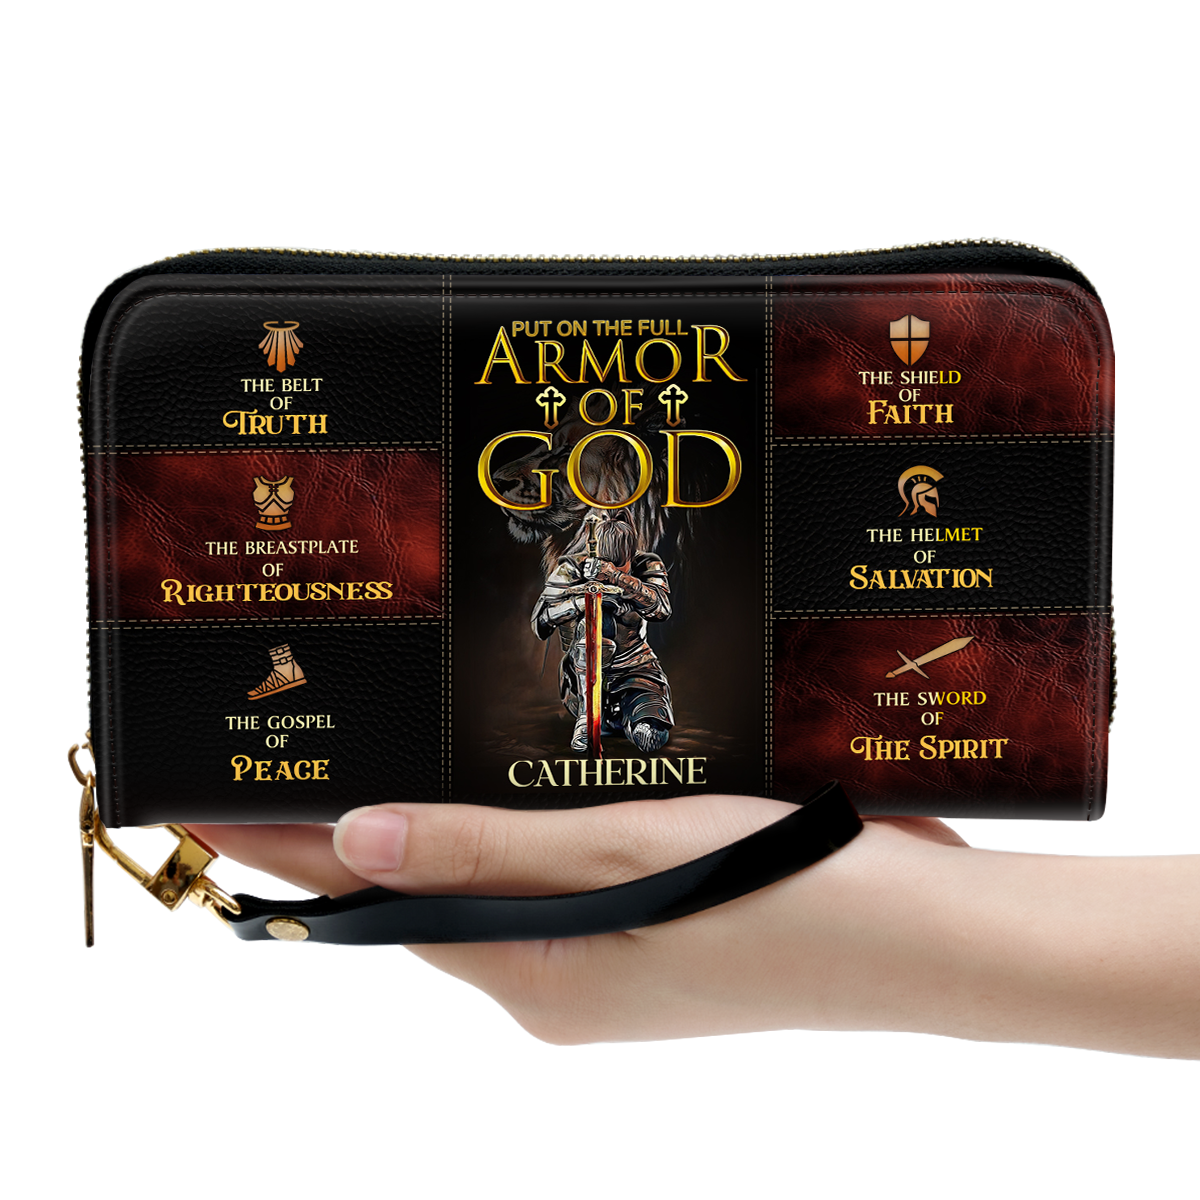 Jesuspirit | Personalized Leather Clutch Purse With Wristlet Strap Handle | Spiritual Gifts For Christian Women | Armor Of God CPM777